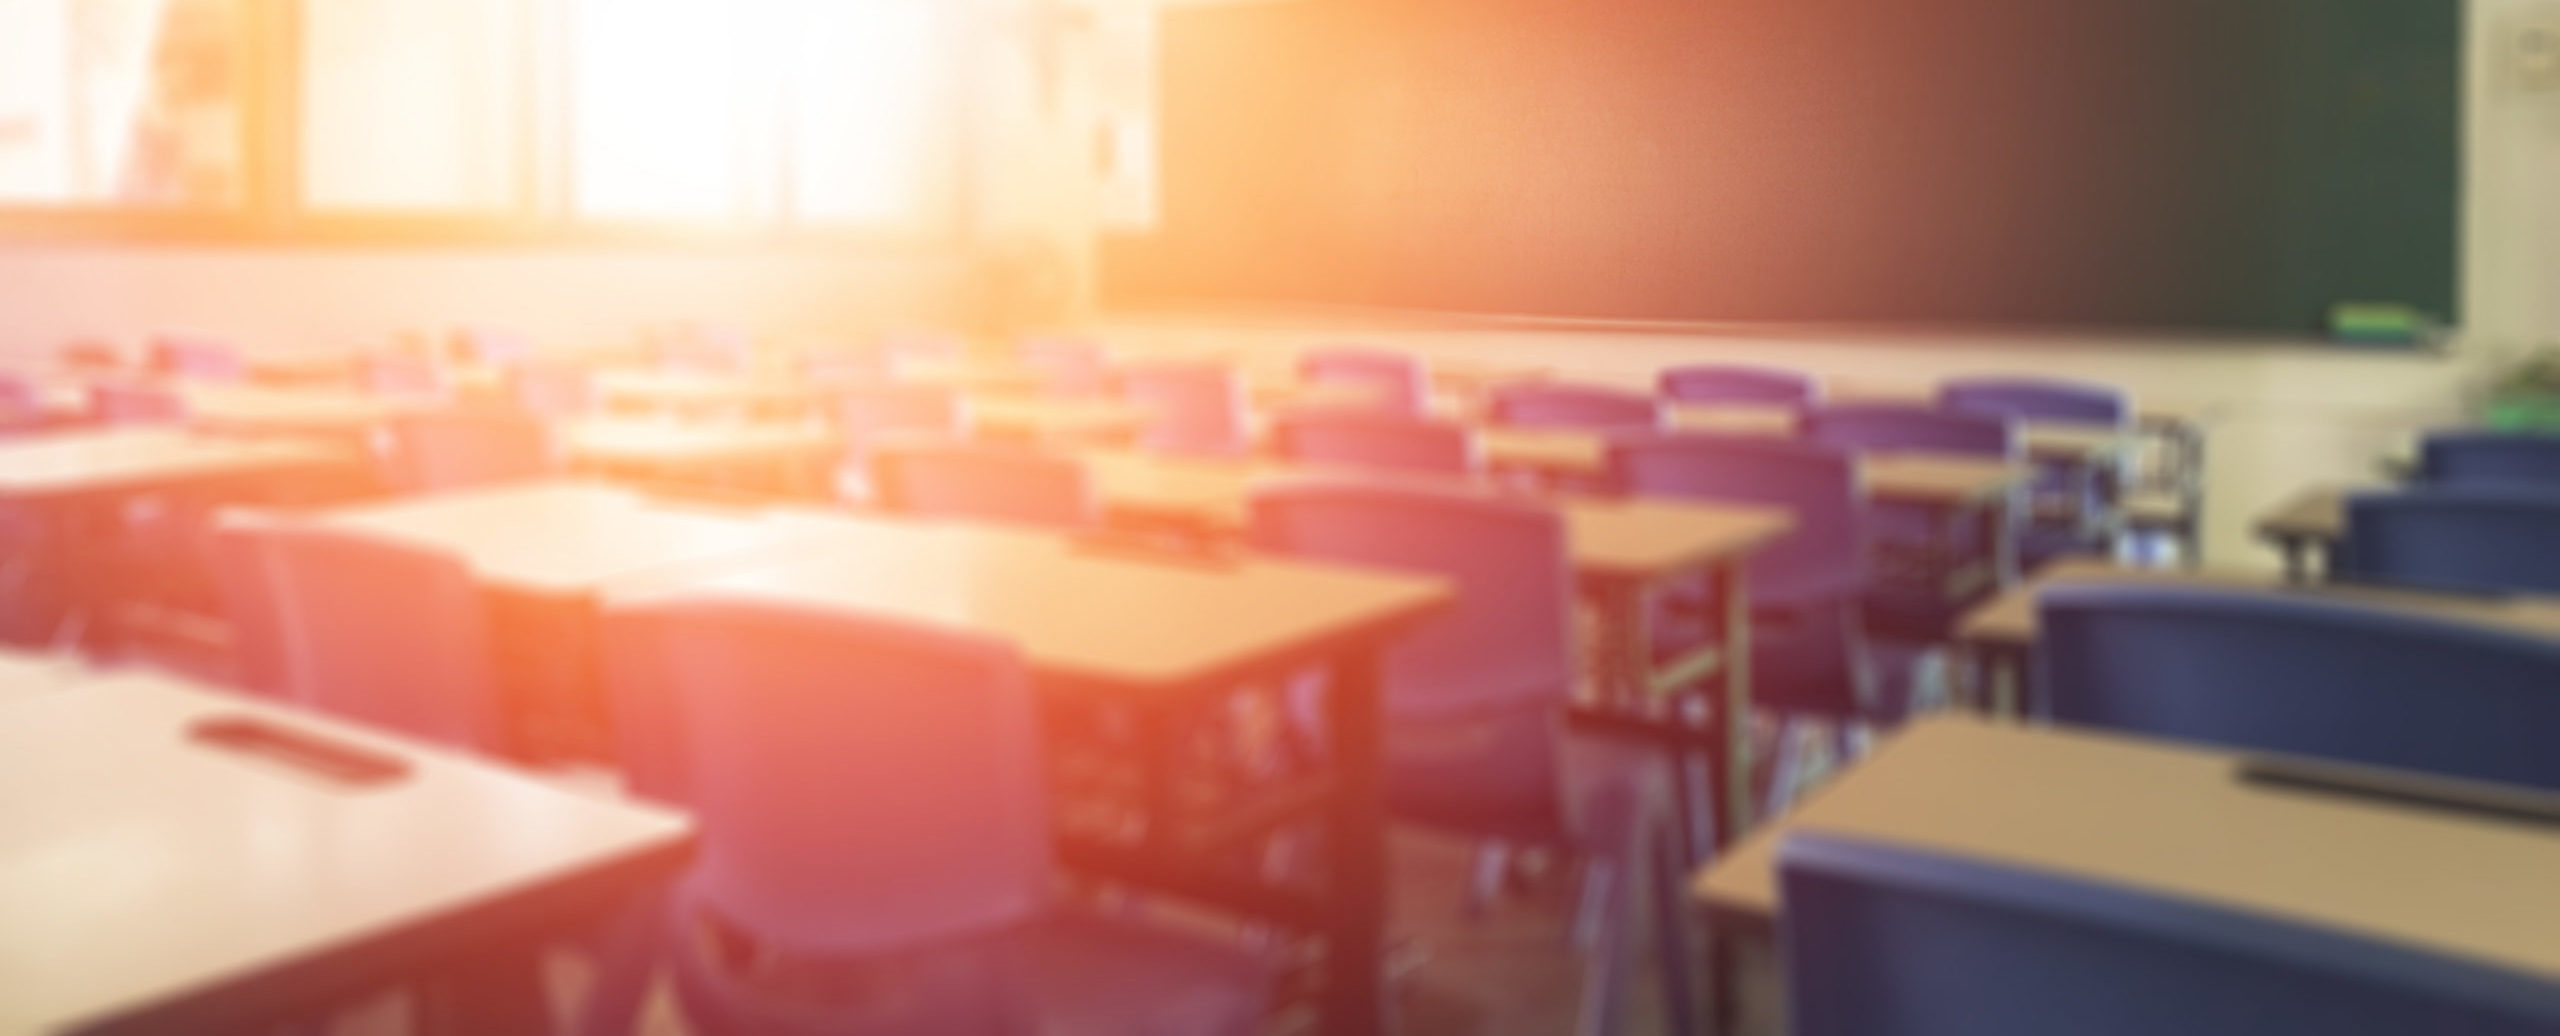 Minnesota to Close Schools for COVID-19 Planning